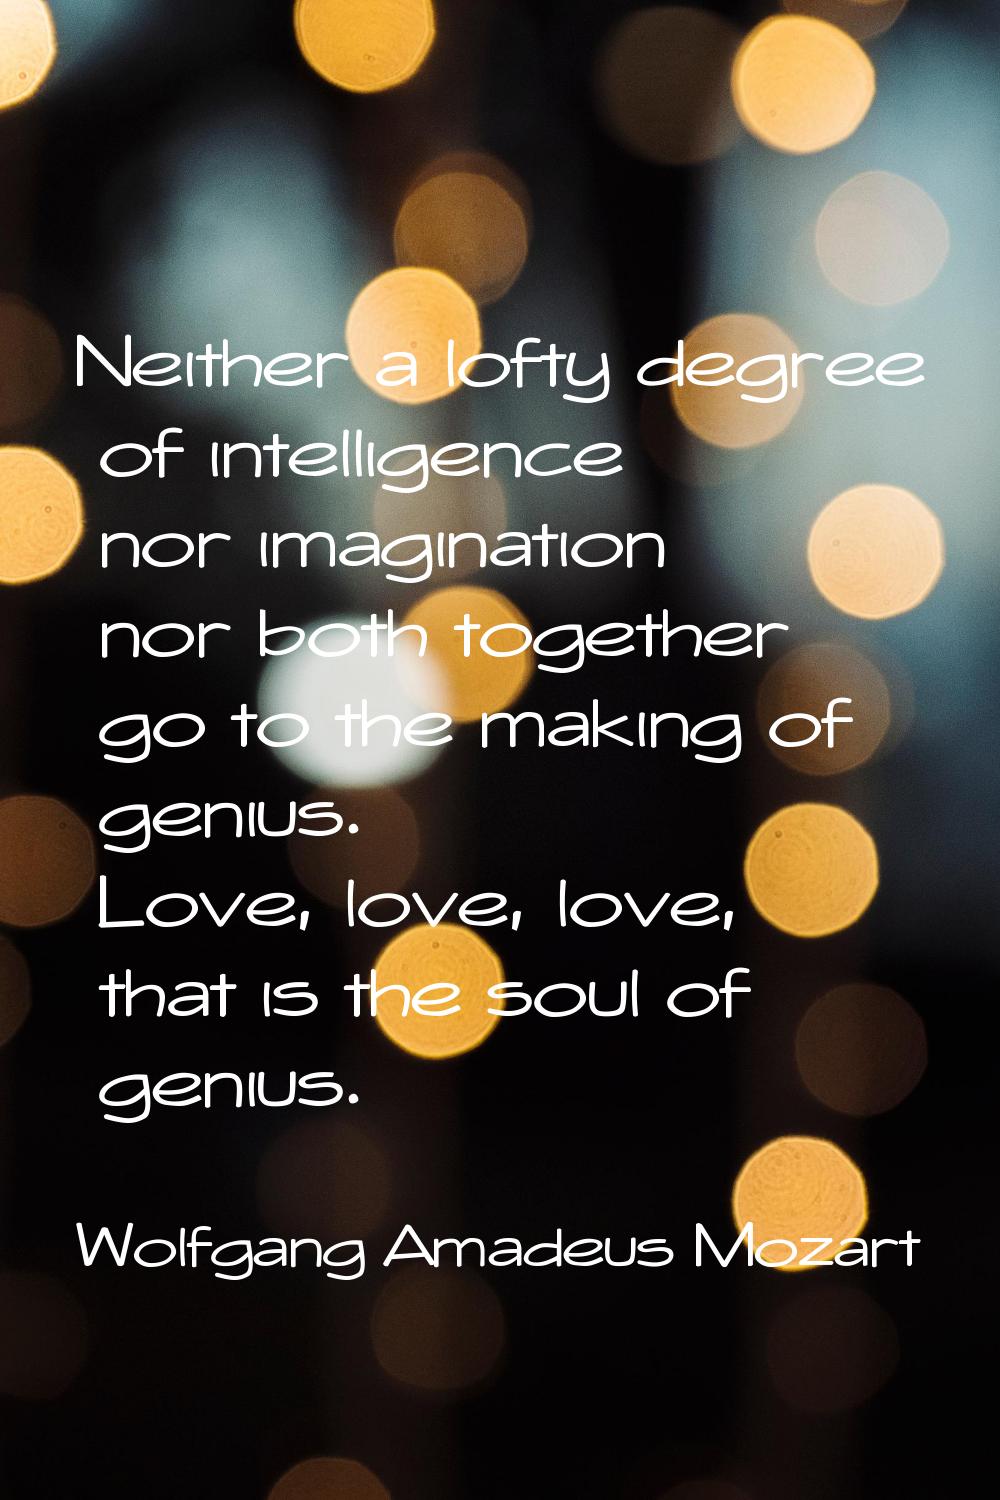 Neither a lofty degree of intelligence nor imagination nor both together go to the making of genius